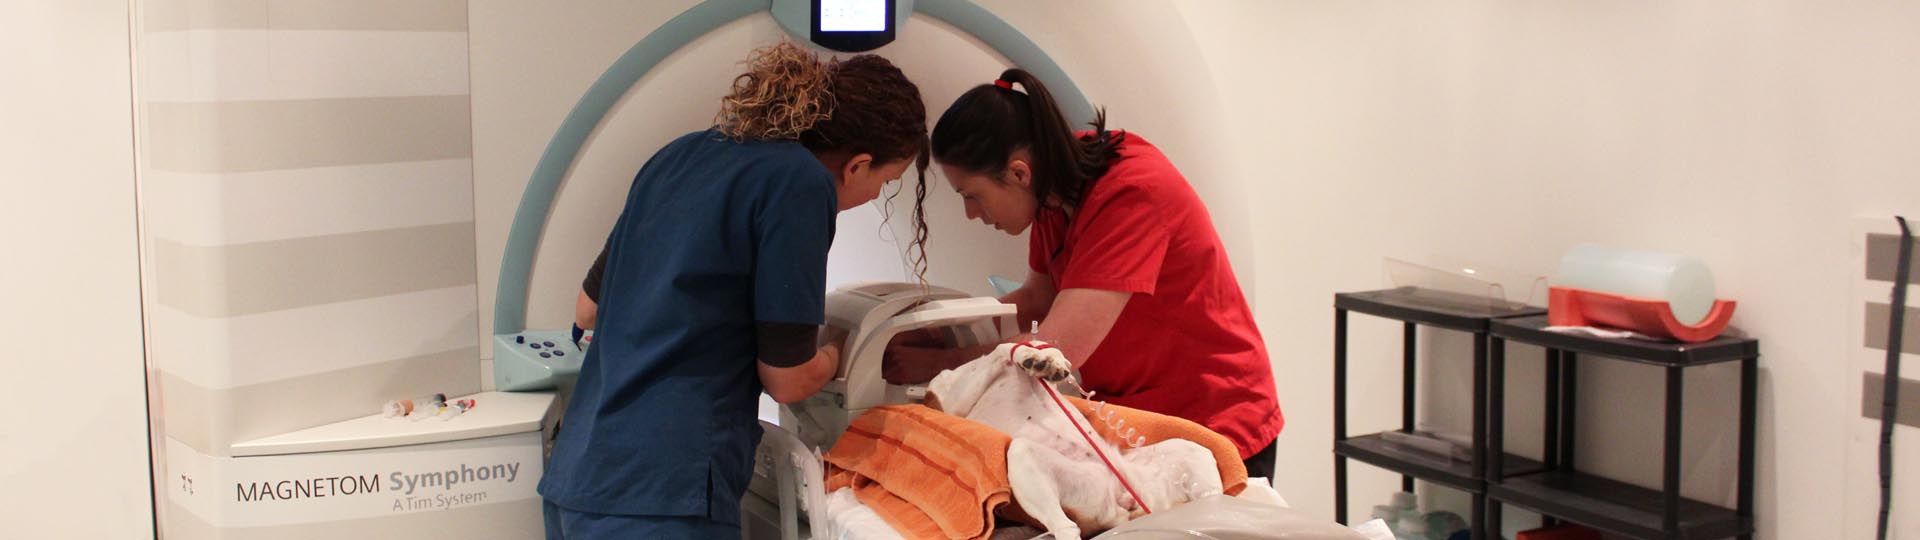 Registered Veterinary Nurse and Radiographer positioning patient in MRI scanner